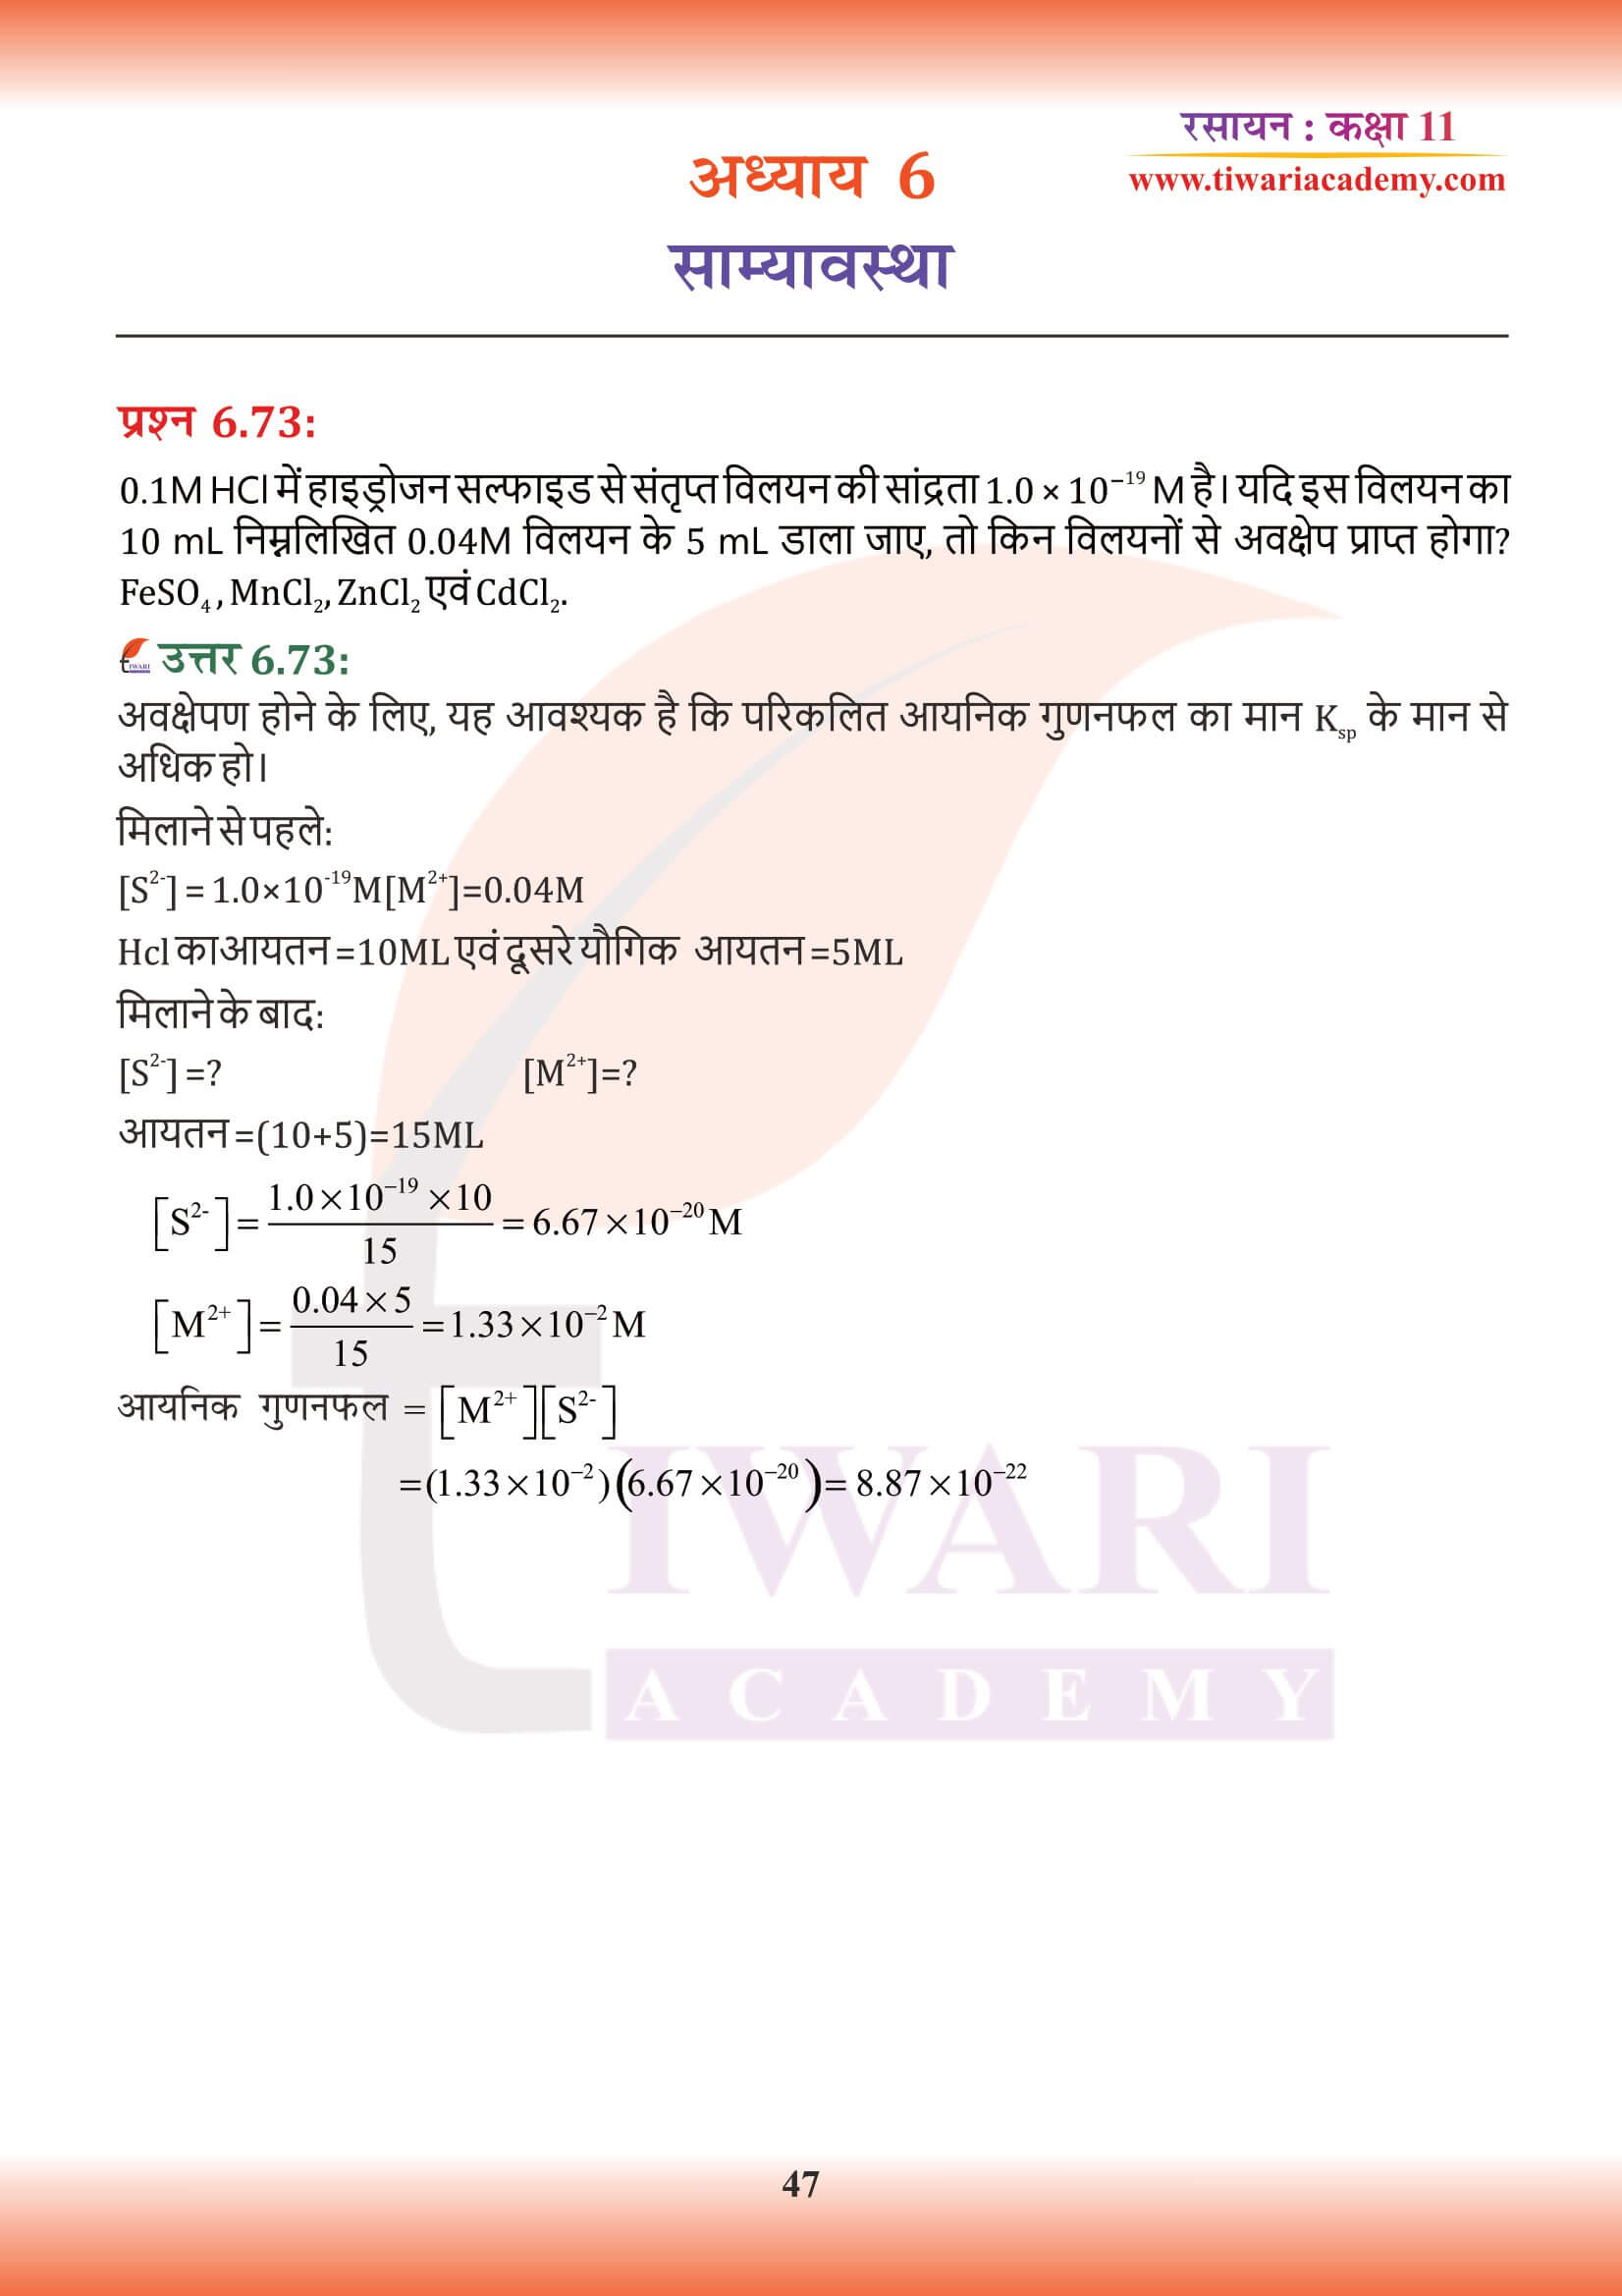 NCERT Class 11 Chemistry Chapter 6 in Hindi solutions